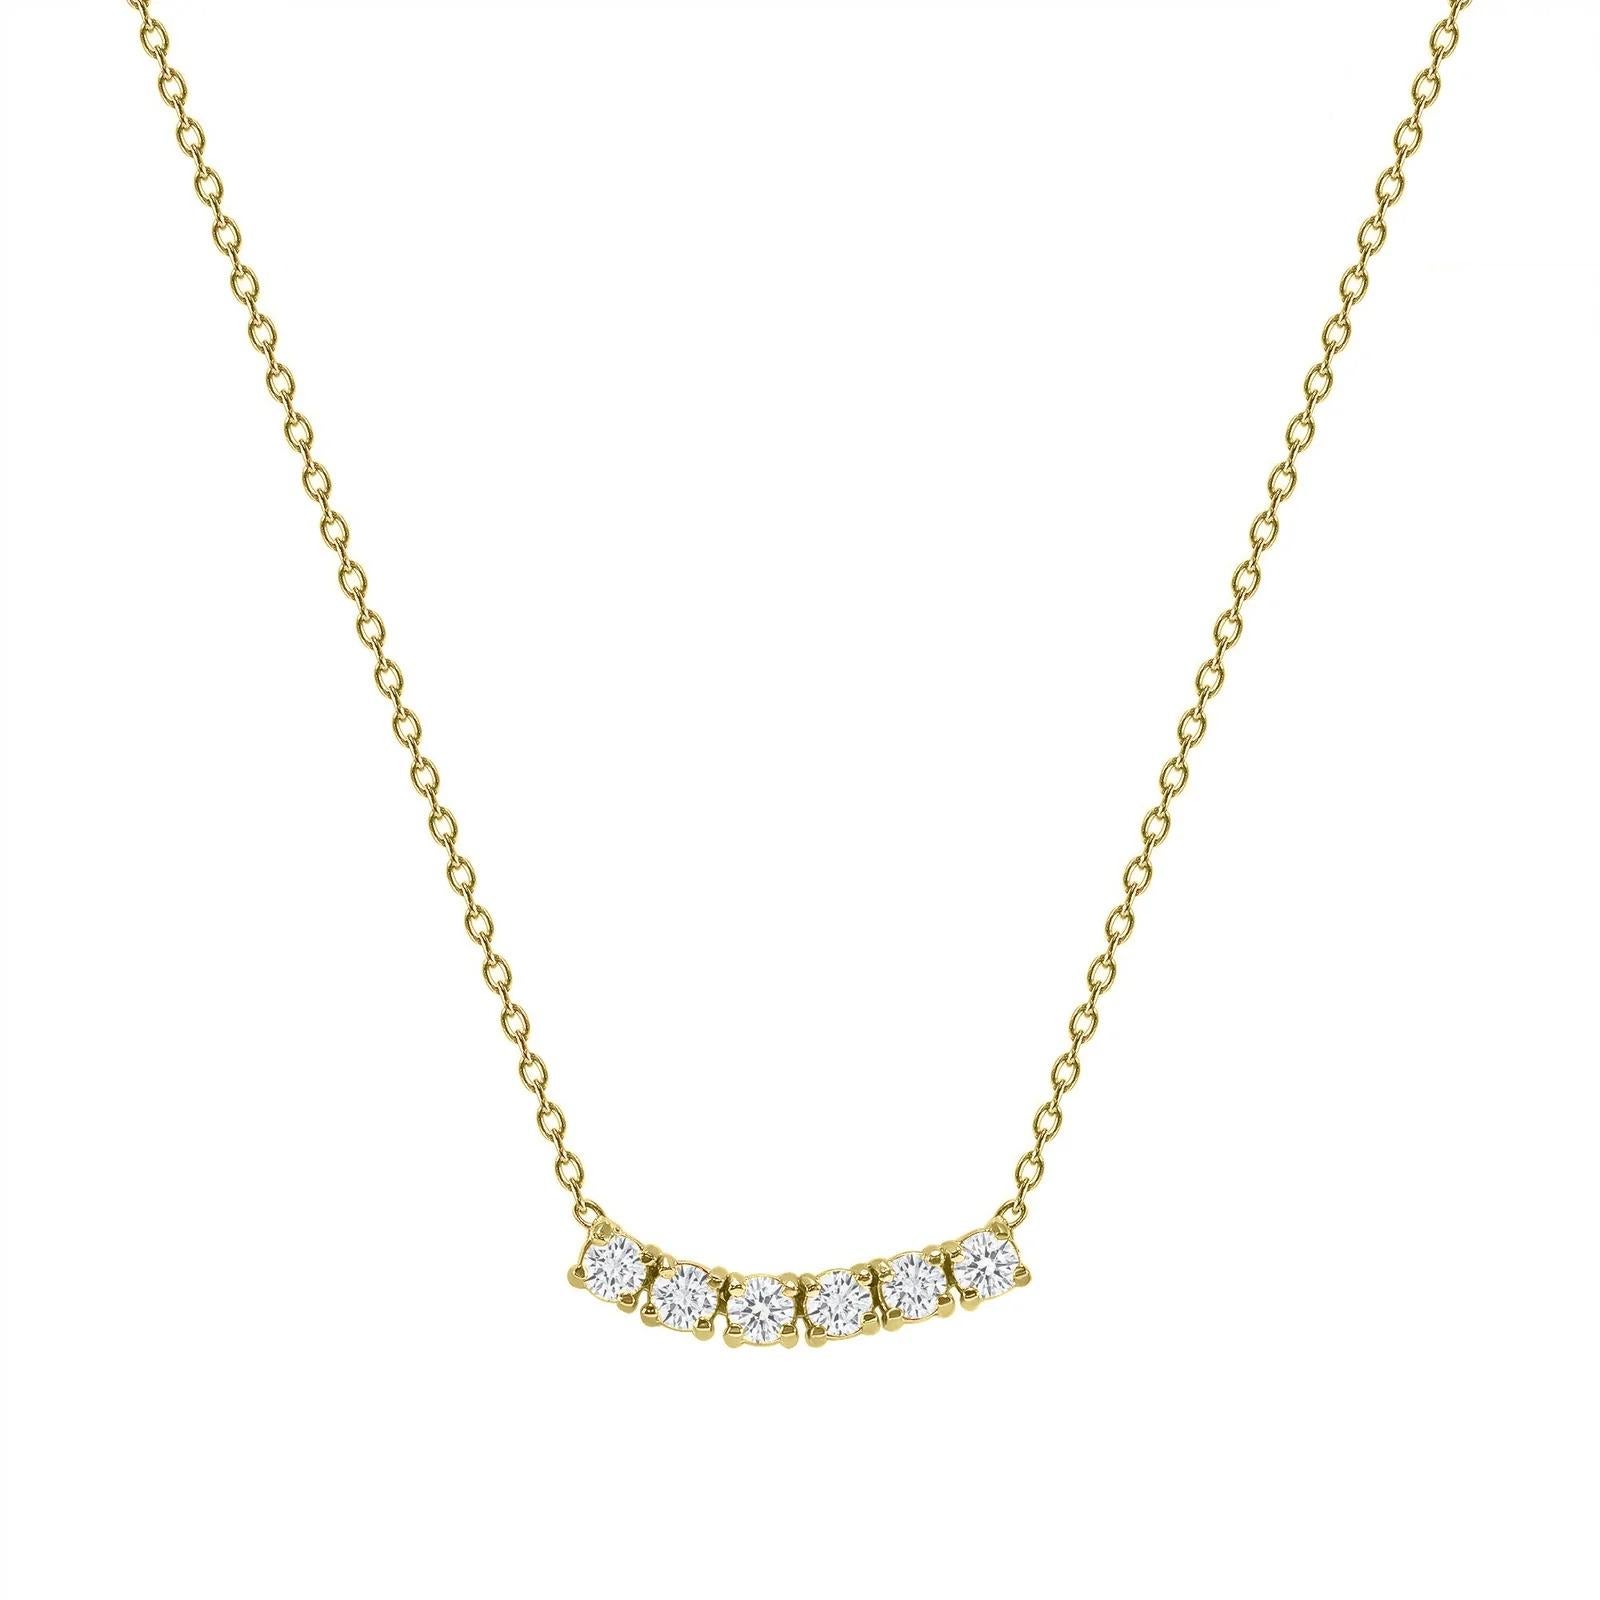 This petite, curved diamond necklace is crafted with gorgeous 14k gold set with six round diamonds.  

Gold: 14k 
Diamond Total Carats: 1 ct
Diamond Cut: Round (6 diamonds)
Diamond Clarity: VS
Diamond Color: F
Color: Yellow Gold
Necklace Length: 22